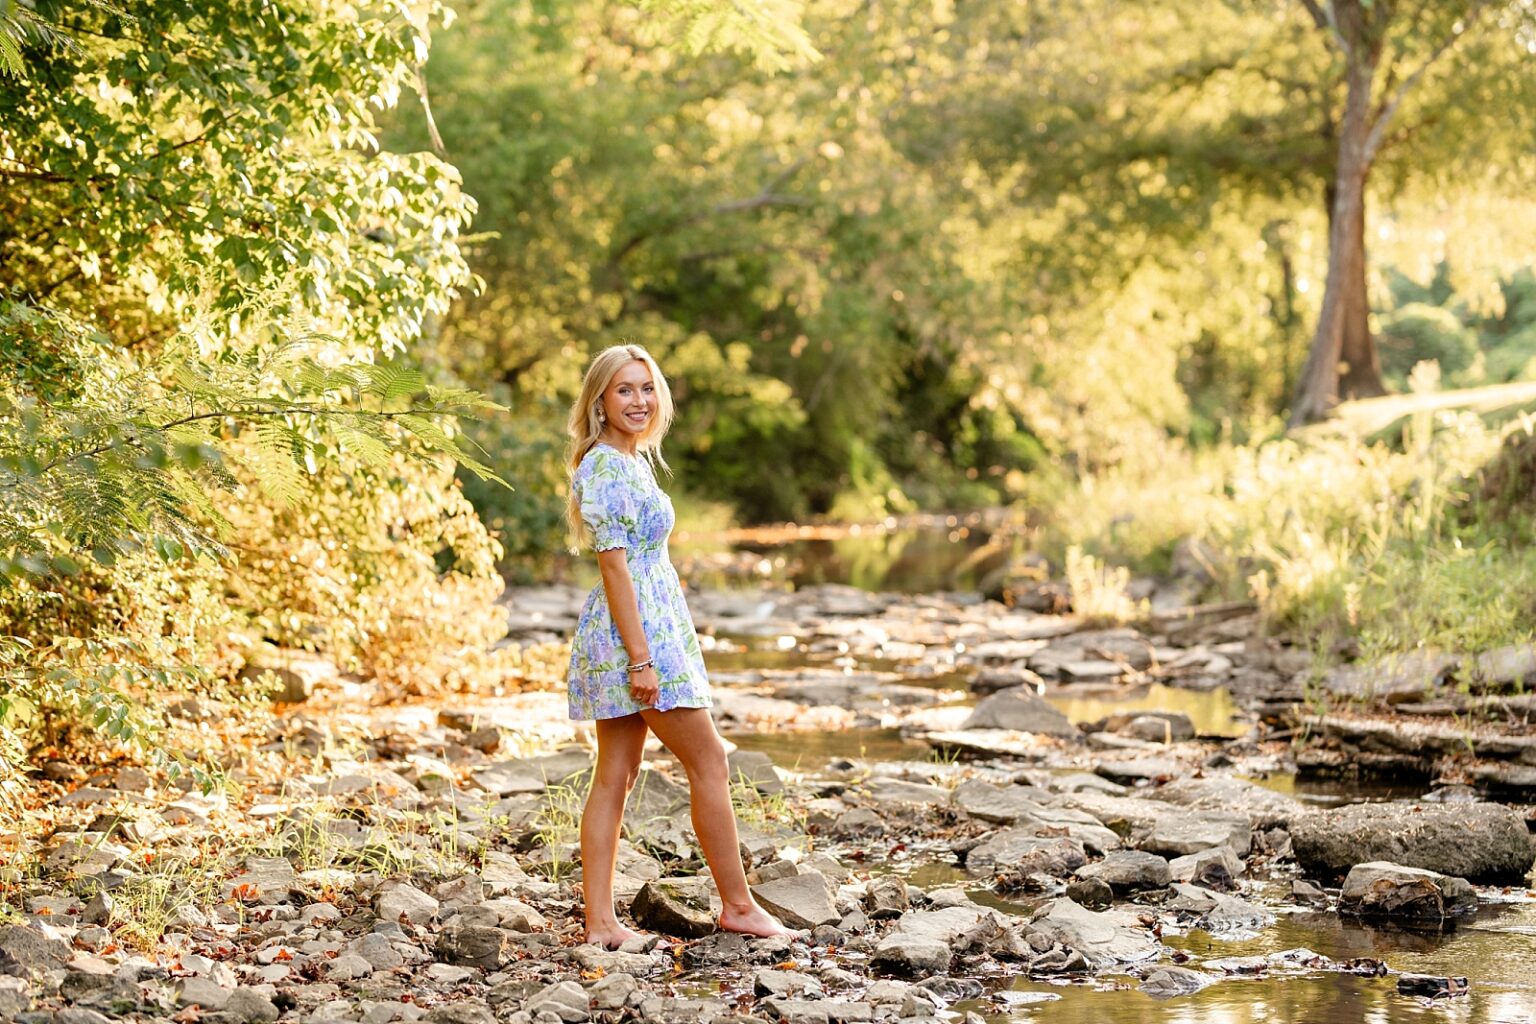 Girl takes senior pictures in pretty purple floral dress. Outfit ideas for senior pictures. Senior photos in Birmingham, senior portraits, creek photoshoot, sunset photography, high school senior photographer